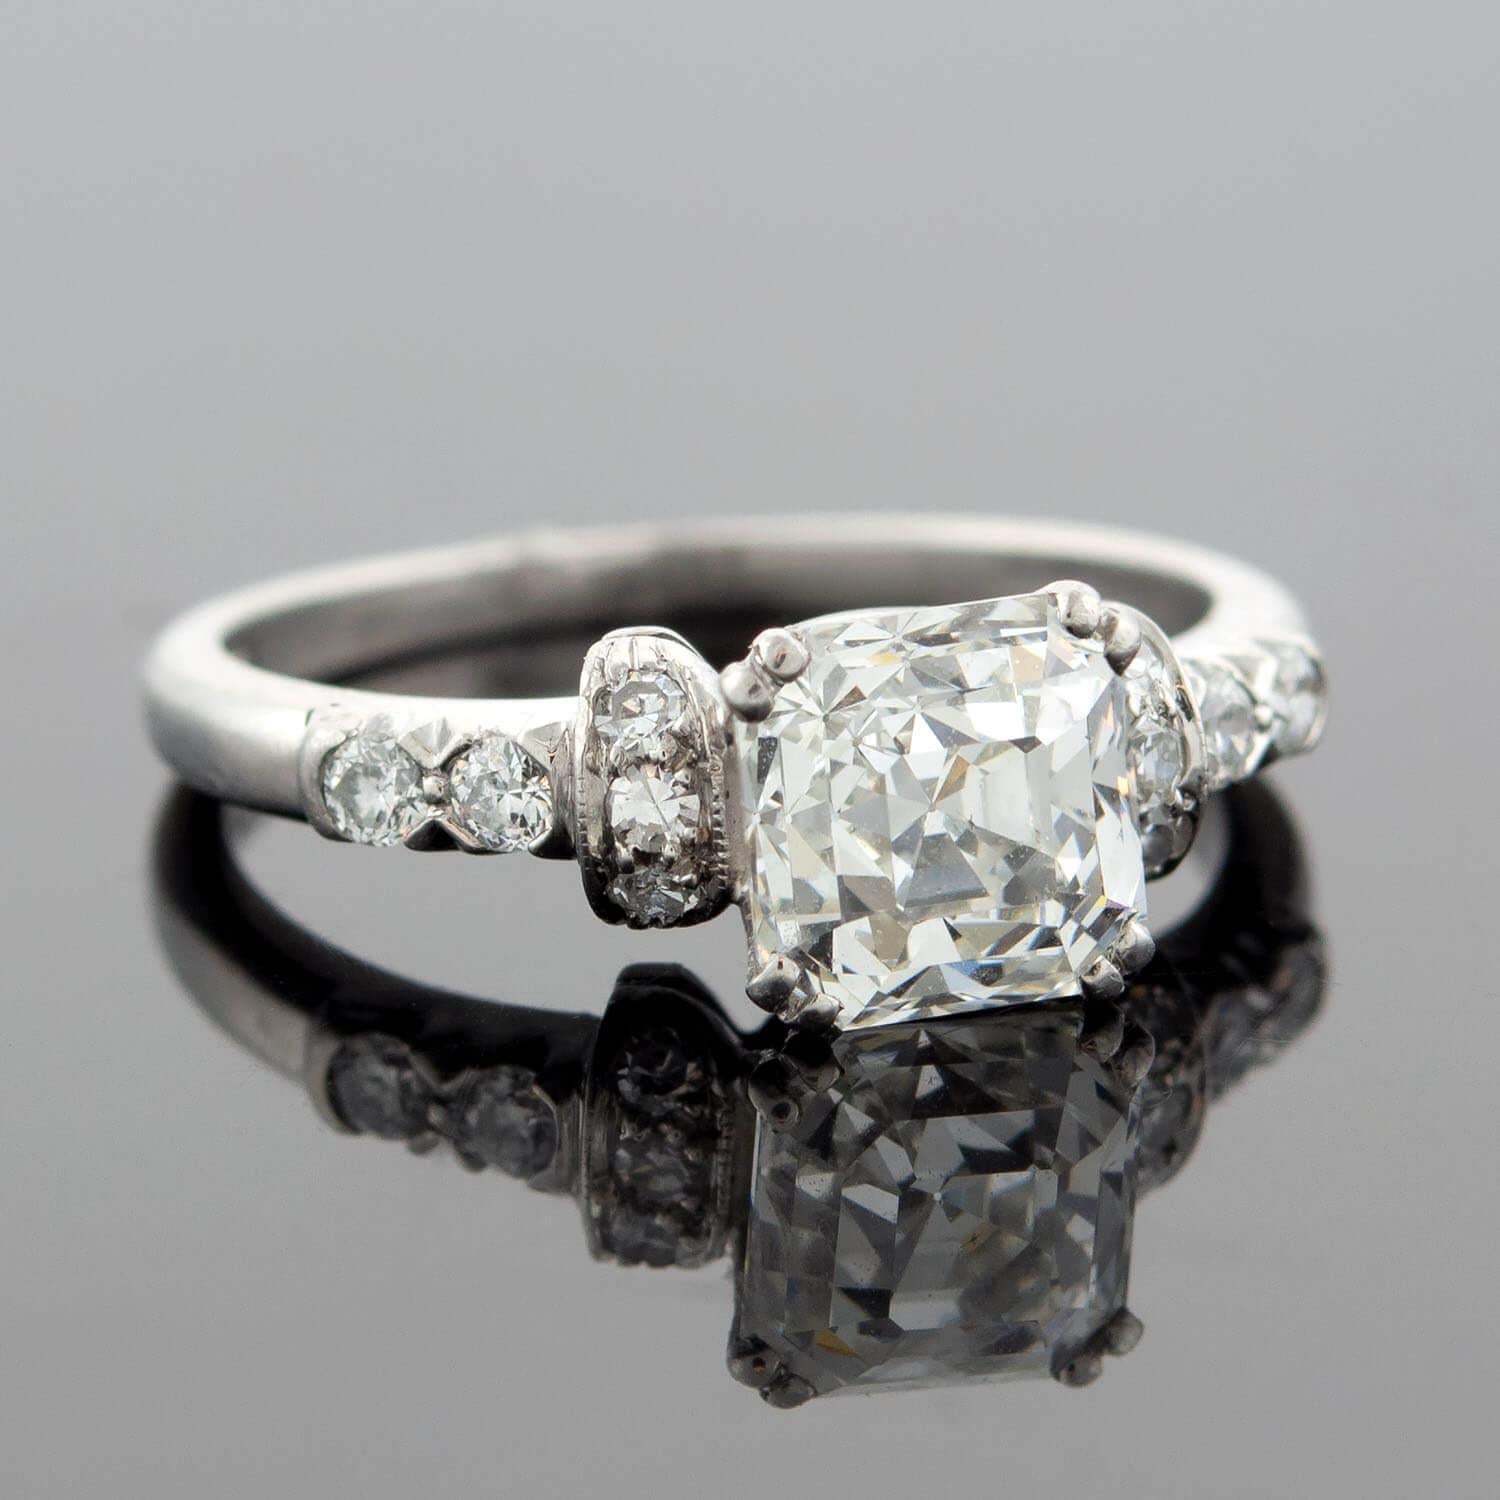 This diamond engagement ring from the late Art Deco (ca1920s) era is a breathtaking beauty! Resting at the center of a platinum setting is a stunning 1.52ct Asscher Cut diamond. This particular modification of an Emerald Cut diamond is also known as